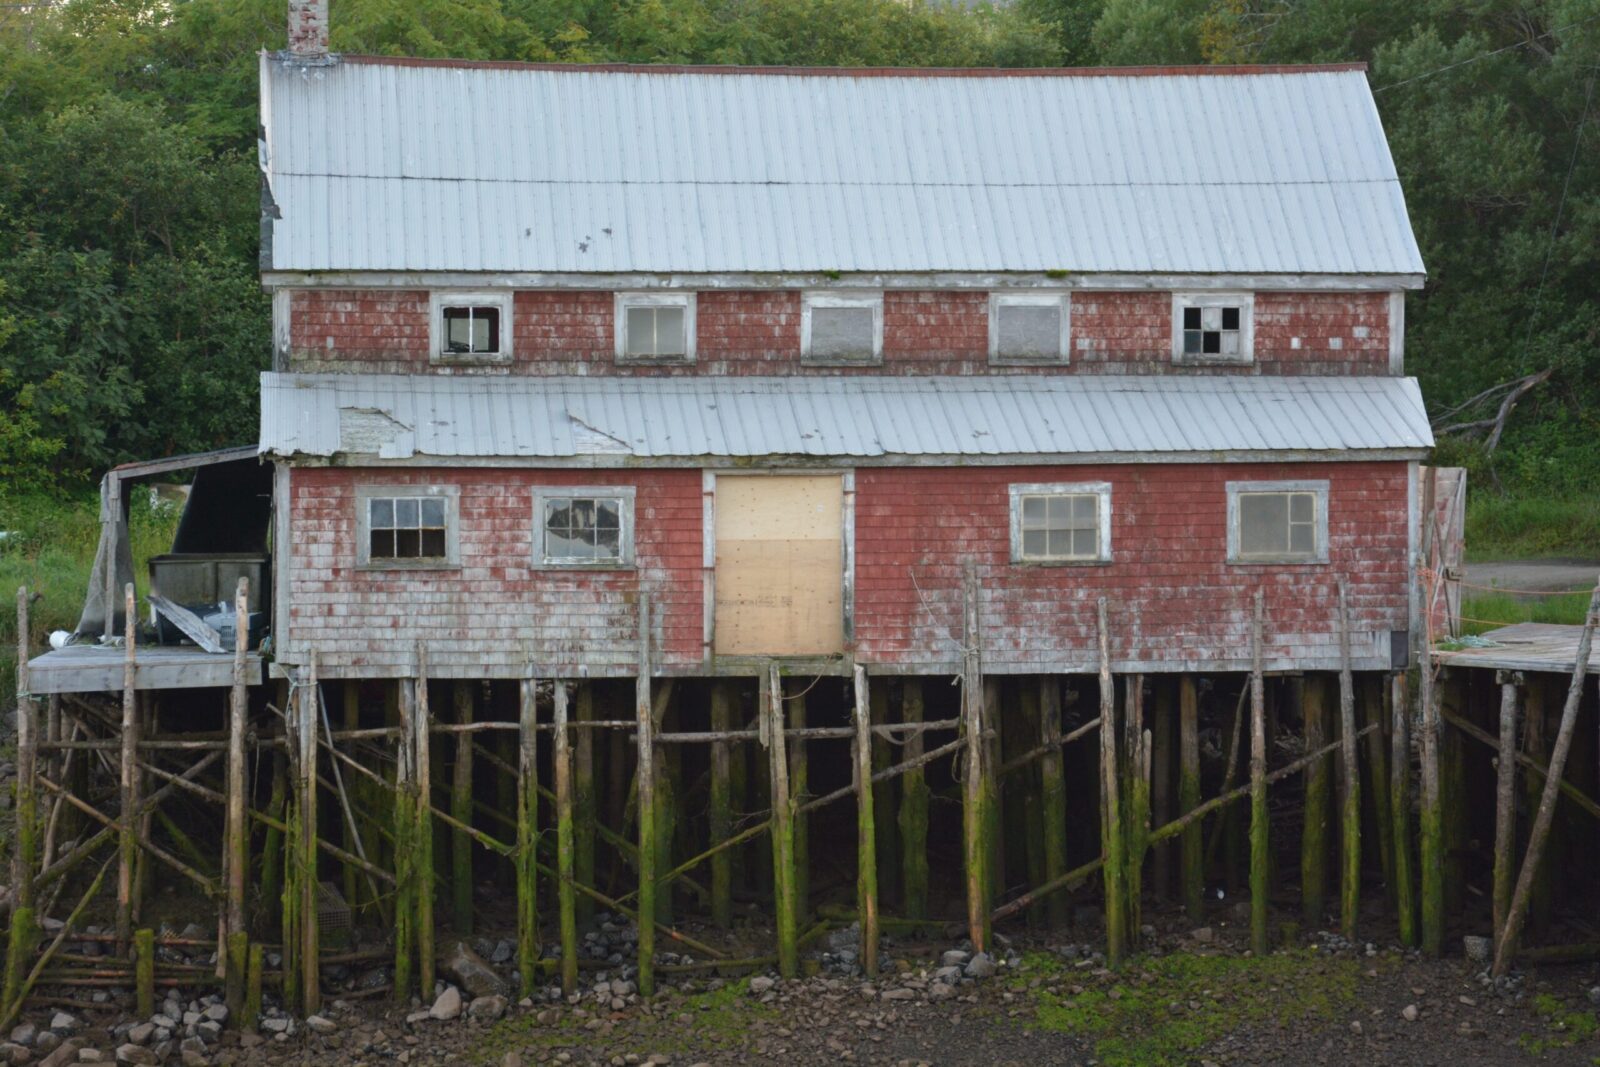 An old red building sits on top of a wooden pier.